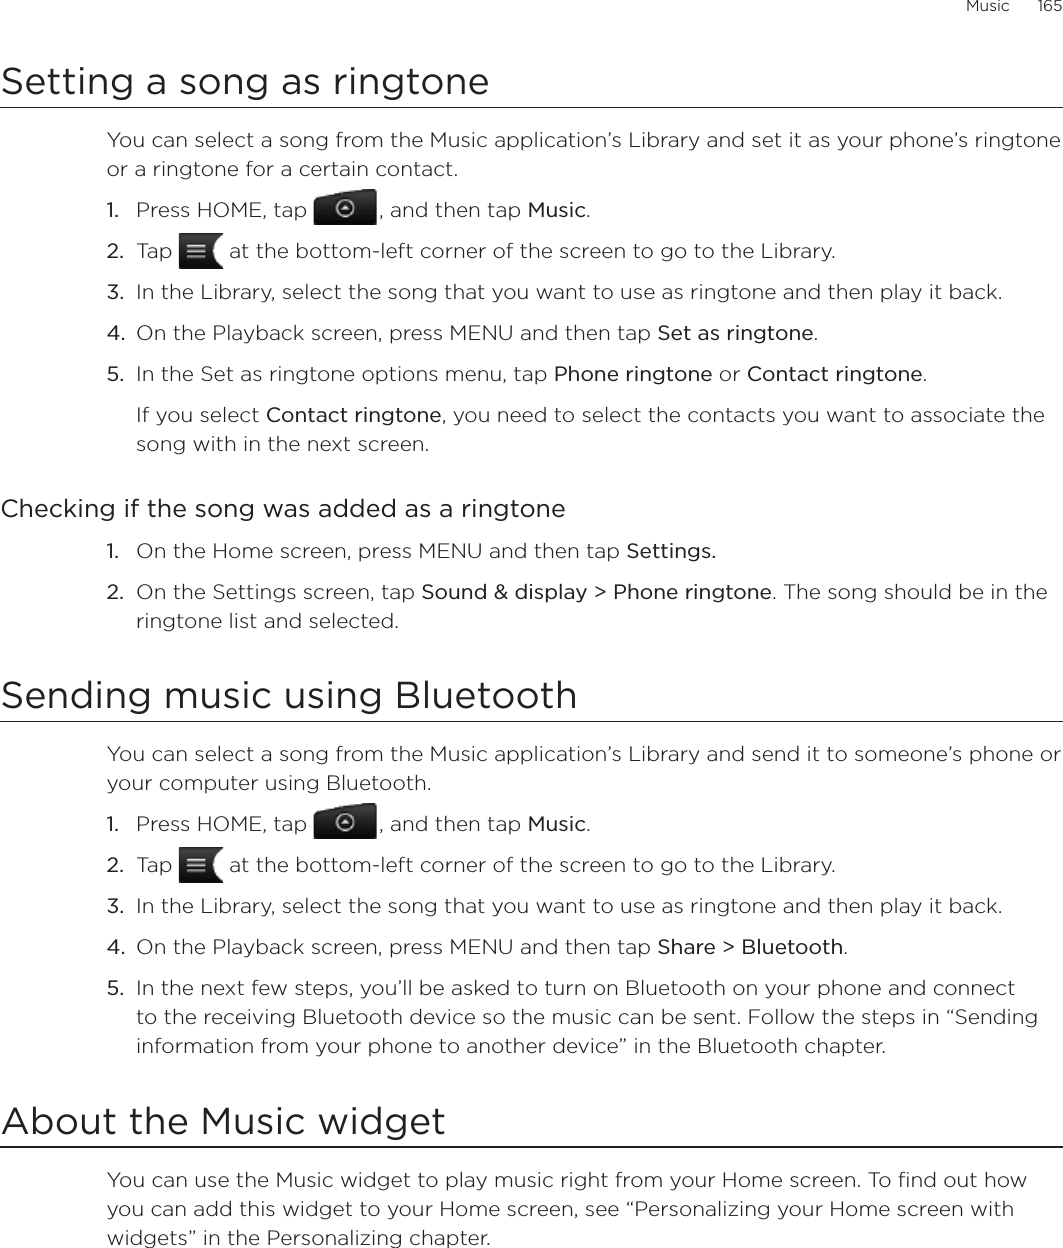 Music      165Setting a song as ringtoneYou can select a song from the Music application’s Library and set it as your phone’s ringtone or a ringtone for a certain contact.Press HOME, tap  , and then tap Music.Tap   at the bottom-left corner of the screen to go to the Library.In the Library, select the song that you want to use as ringtone and then play it back.On the Playback screen, press MENU and then tap Set as ringtone.In the Set as ringtone options menu, tap Phone ringtone or Contact ringtone.If you select Contact ringtone, you need to select the contacts you want to associate the song with in the next screen.Checking if the song was added as a ringtoneOn the Home screen, press MENU and then tap Settings.On the Settings screen, tap Sound &amp; display &gt; Phone ringtone. The song should be in the ringtone list and selected. Sending music using BluetoothYou can select a song from the Music application’s Library and send it to someone’s phone or your computer using Bluetooth.Press HOME, tap  , and then tap Music.Tap   at the bottom-left corner of the screen to go to the Library.In the Library, select the song that you want to use as ringtone and then play it back.On the Playback screen, press MENU and then tap Share &gt; Bluetooth.In the next few steps, you’ll be asked to turn on Bluetooth on your phone and connect to the receiving Bluetooth device so the music can be sent. Follow the steps in “Sending information from your phone to another device” in the Bluetooth chapter.About the Music widgetYou can use the Music widget to play music right from your Home screen. To find out how you can add this widget to your Home screen, see “Personalizing your Home screen with widgets” in the Personalizing chapter.1.2.3.4.5.1.2.1.2.3.4.5.